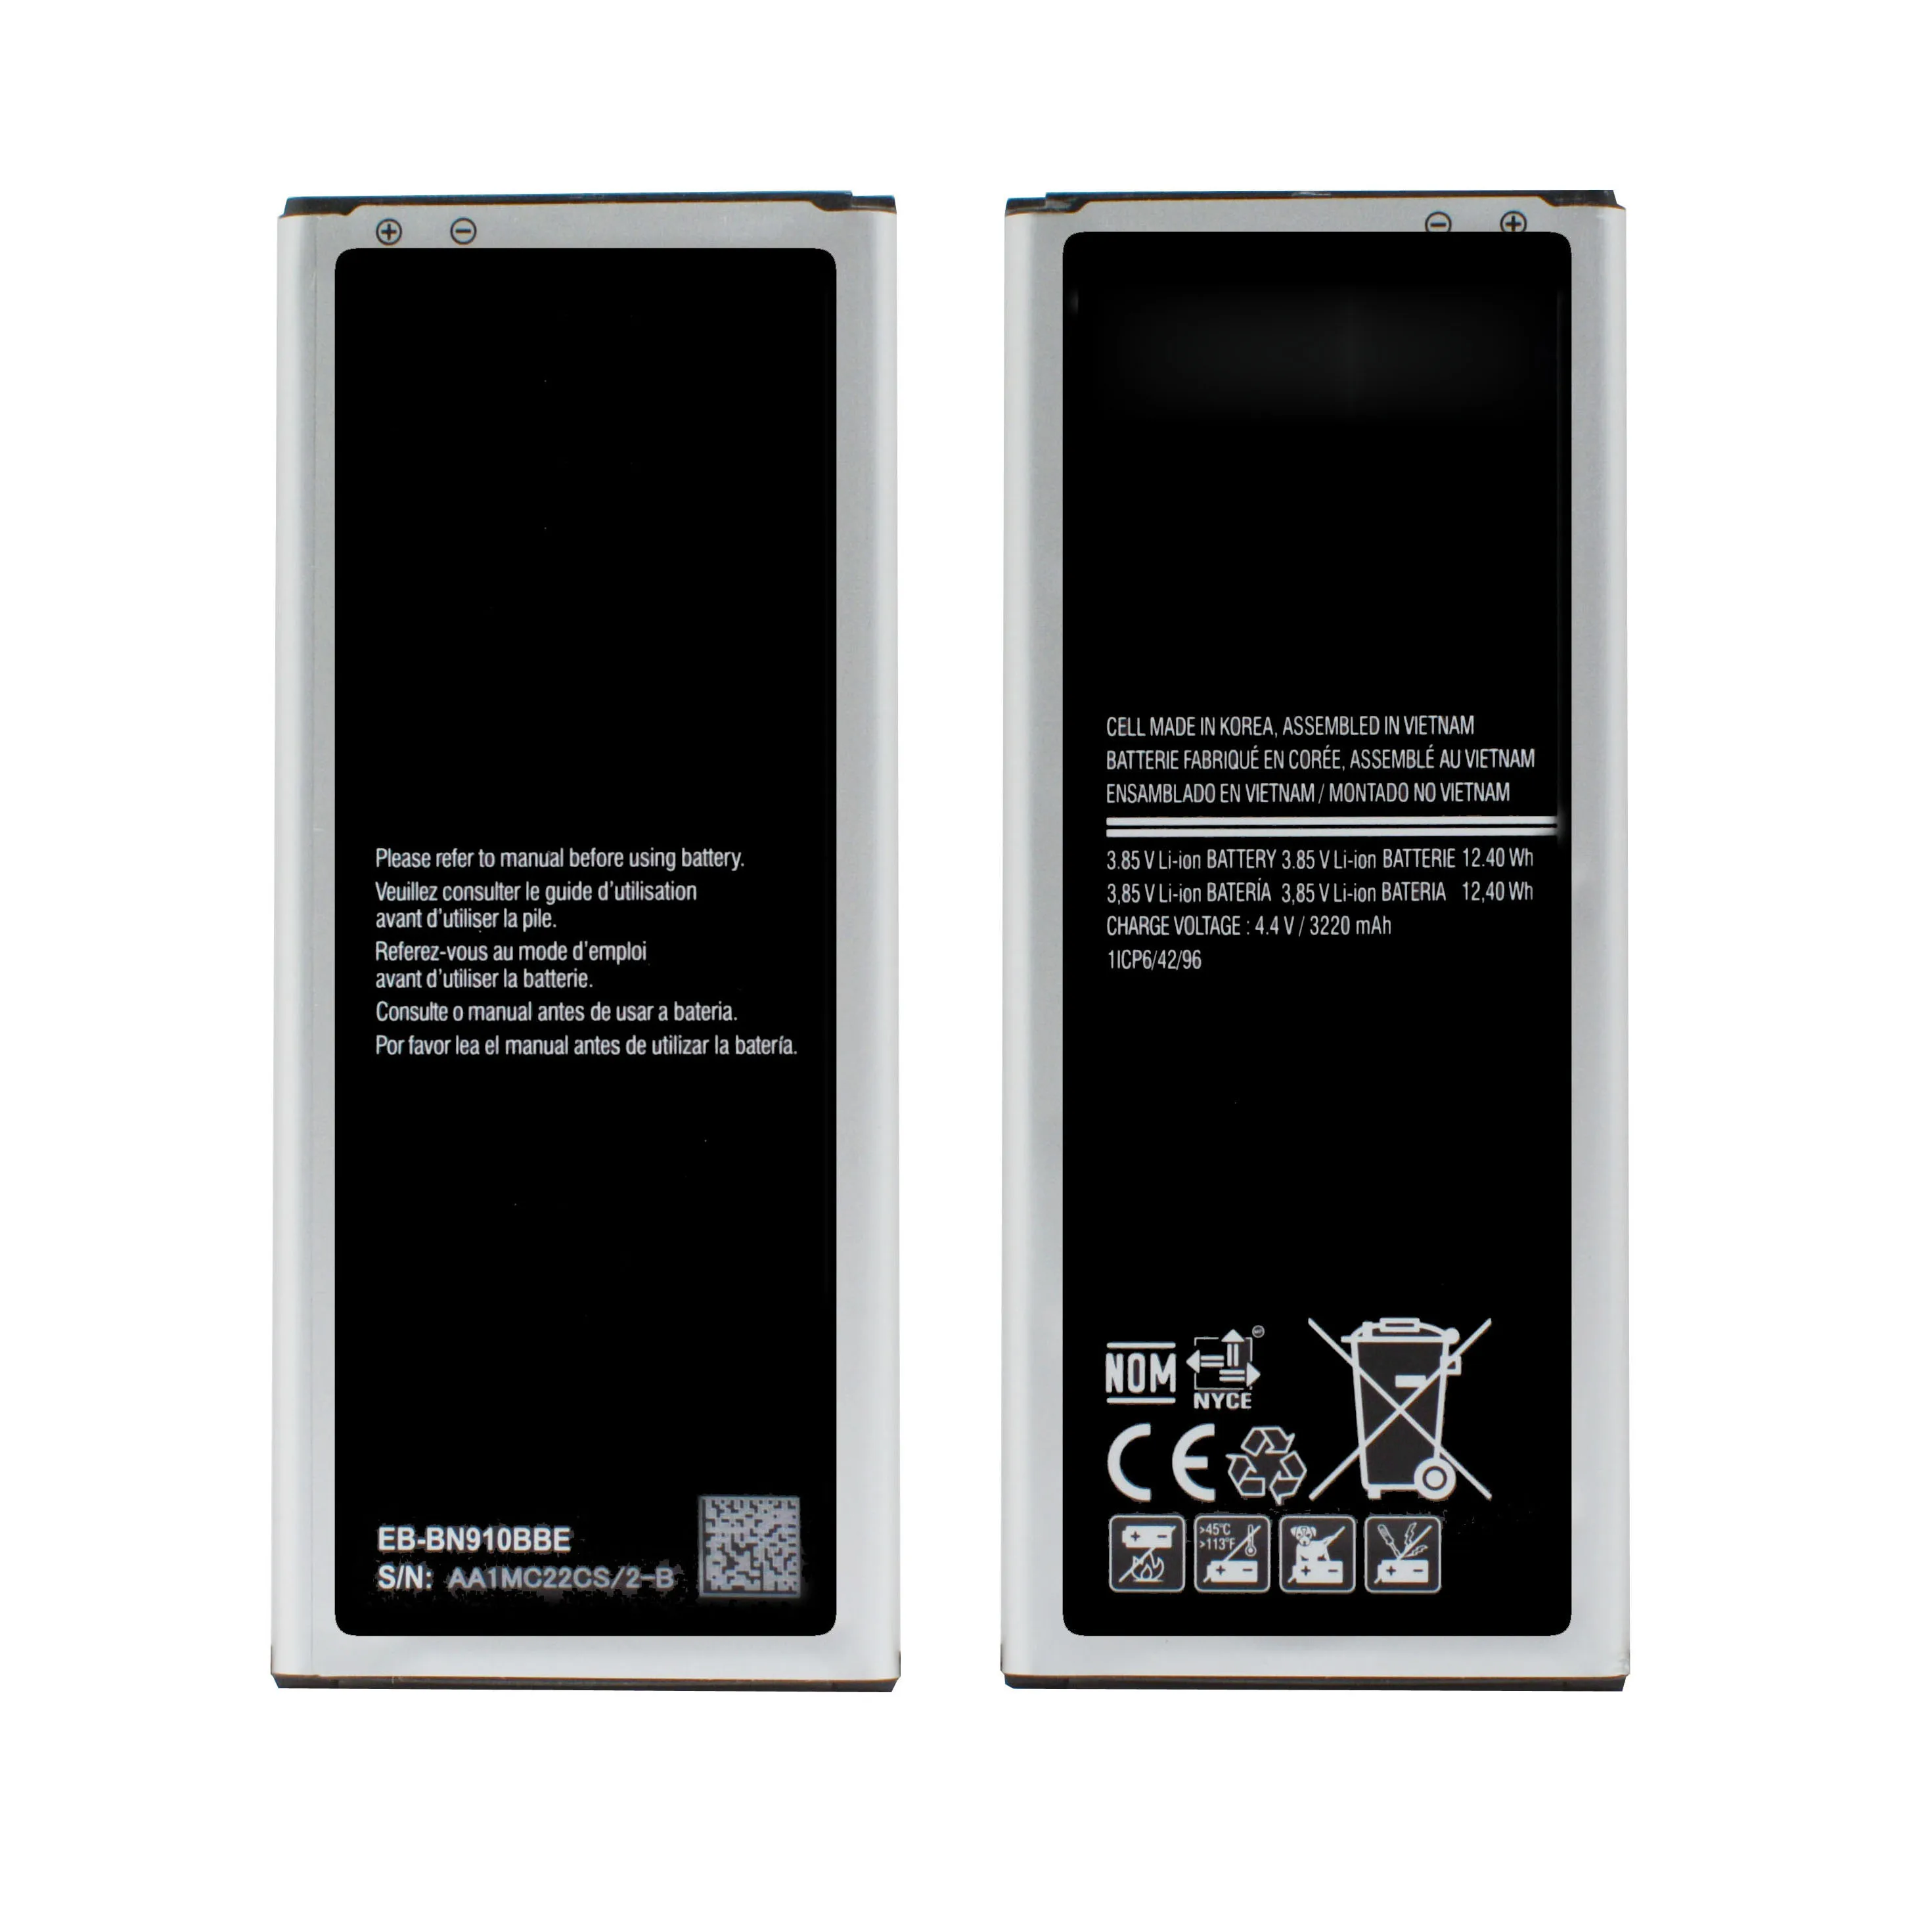 

EB-BN910BBE 3220mAh lithium rechargeable battery For SAMSUNG Galaxy Note 4 N910A N910U N910F N910H N910C AKKU DDP service